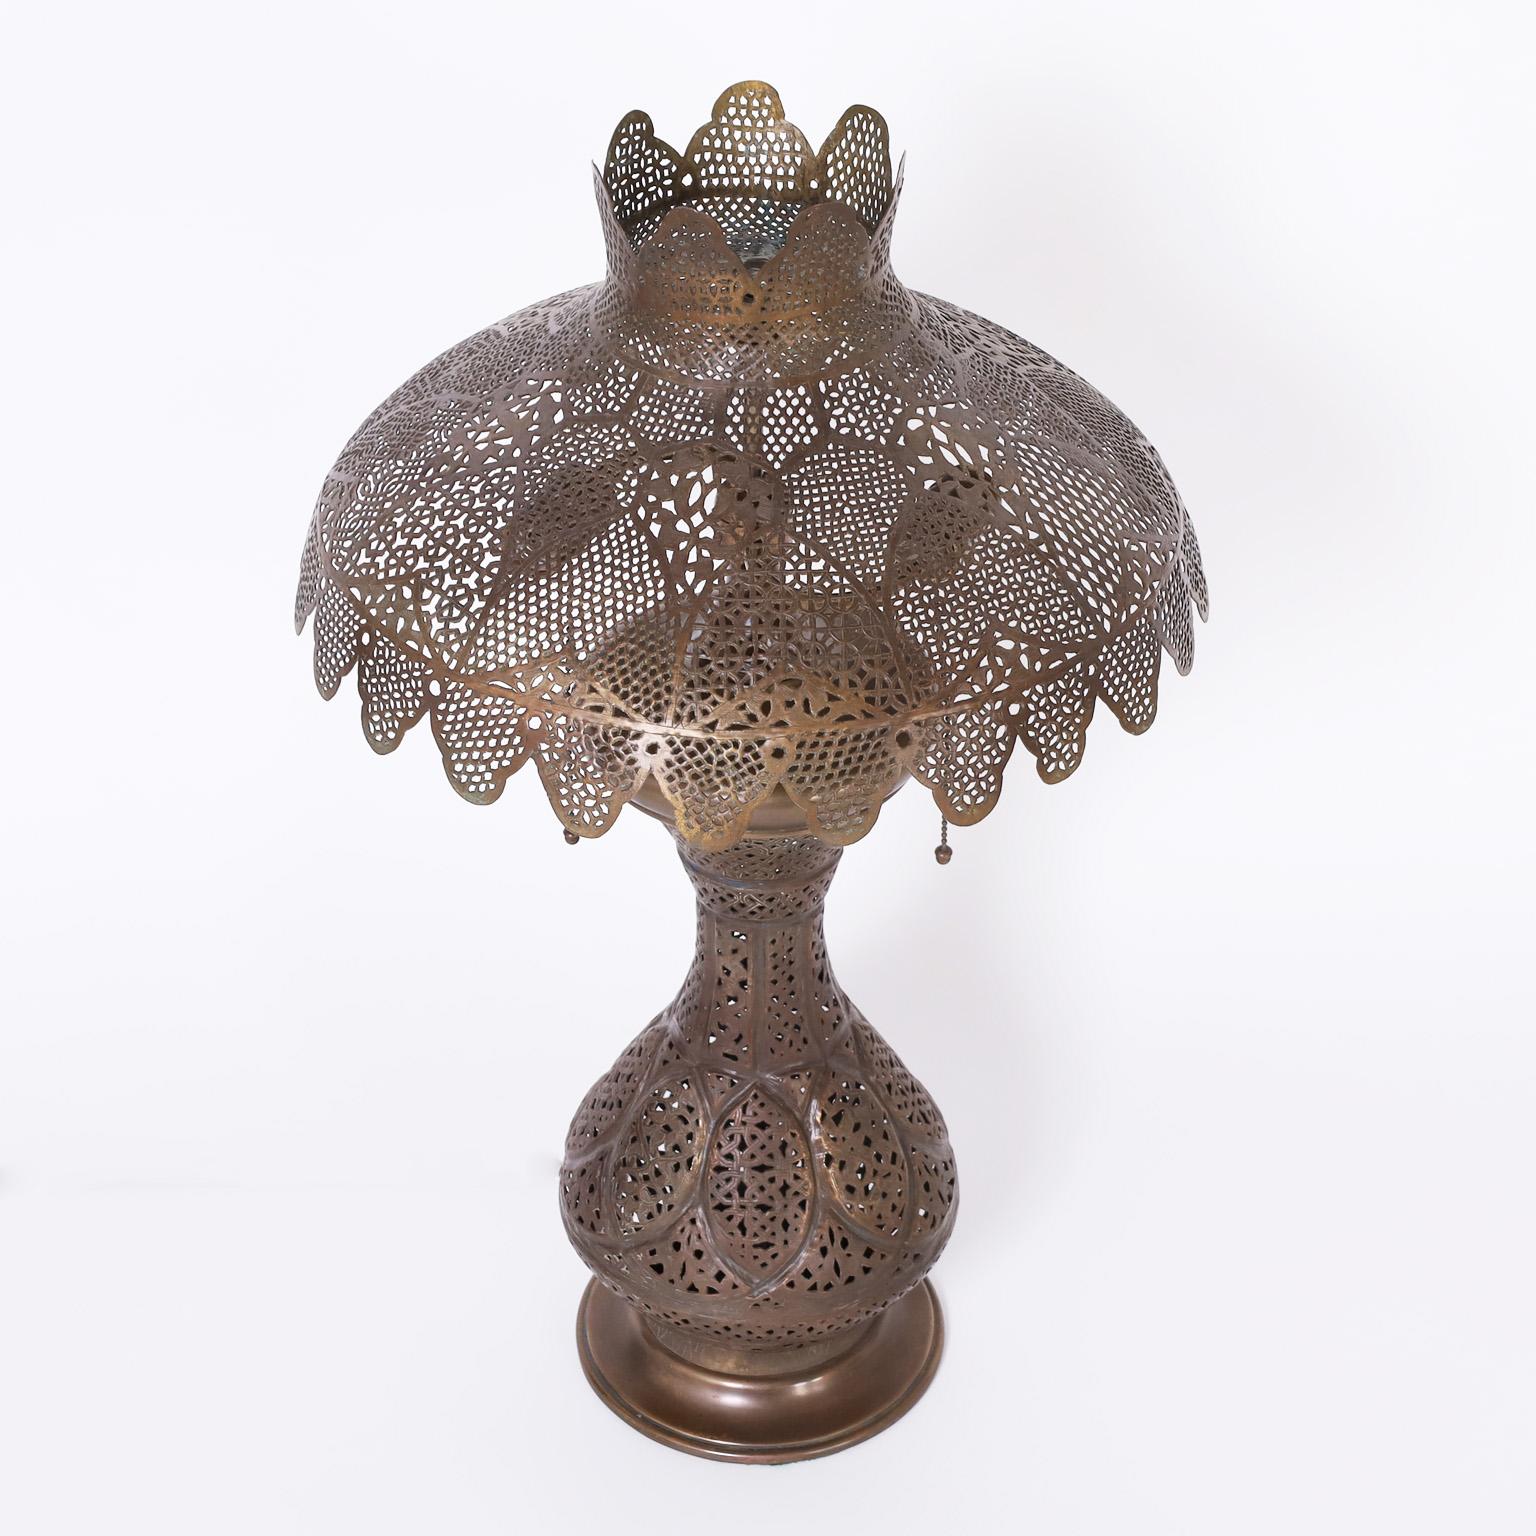 As if from the set of Casa Blanca, an alluring antique Moroccan table lamp and original matching shade hand crafted in pierced brass now having a lush bronze like patina.